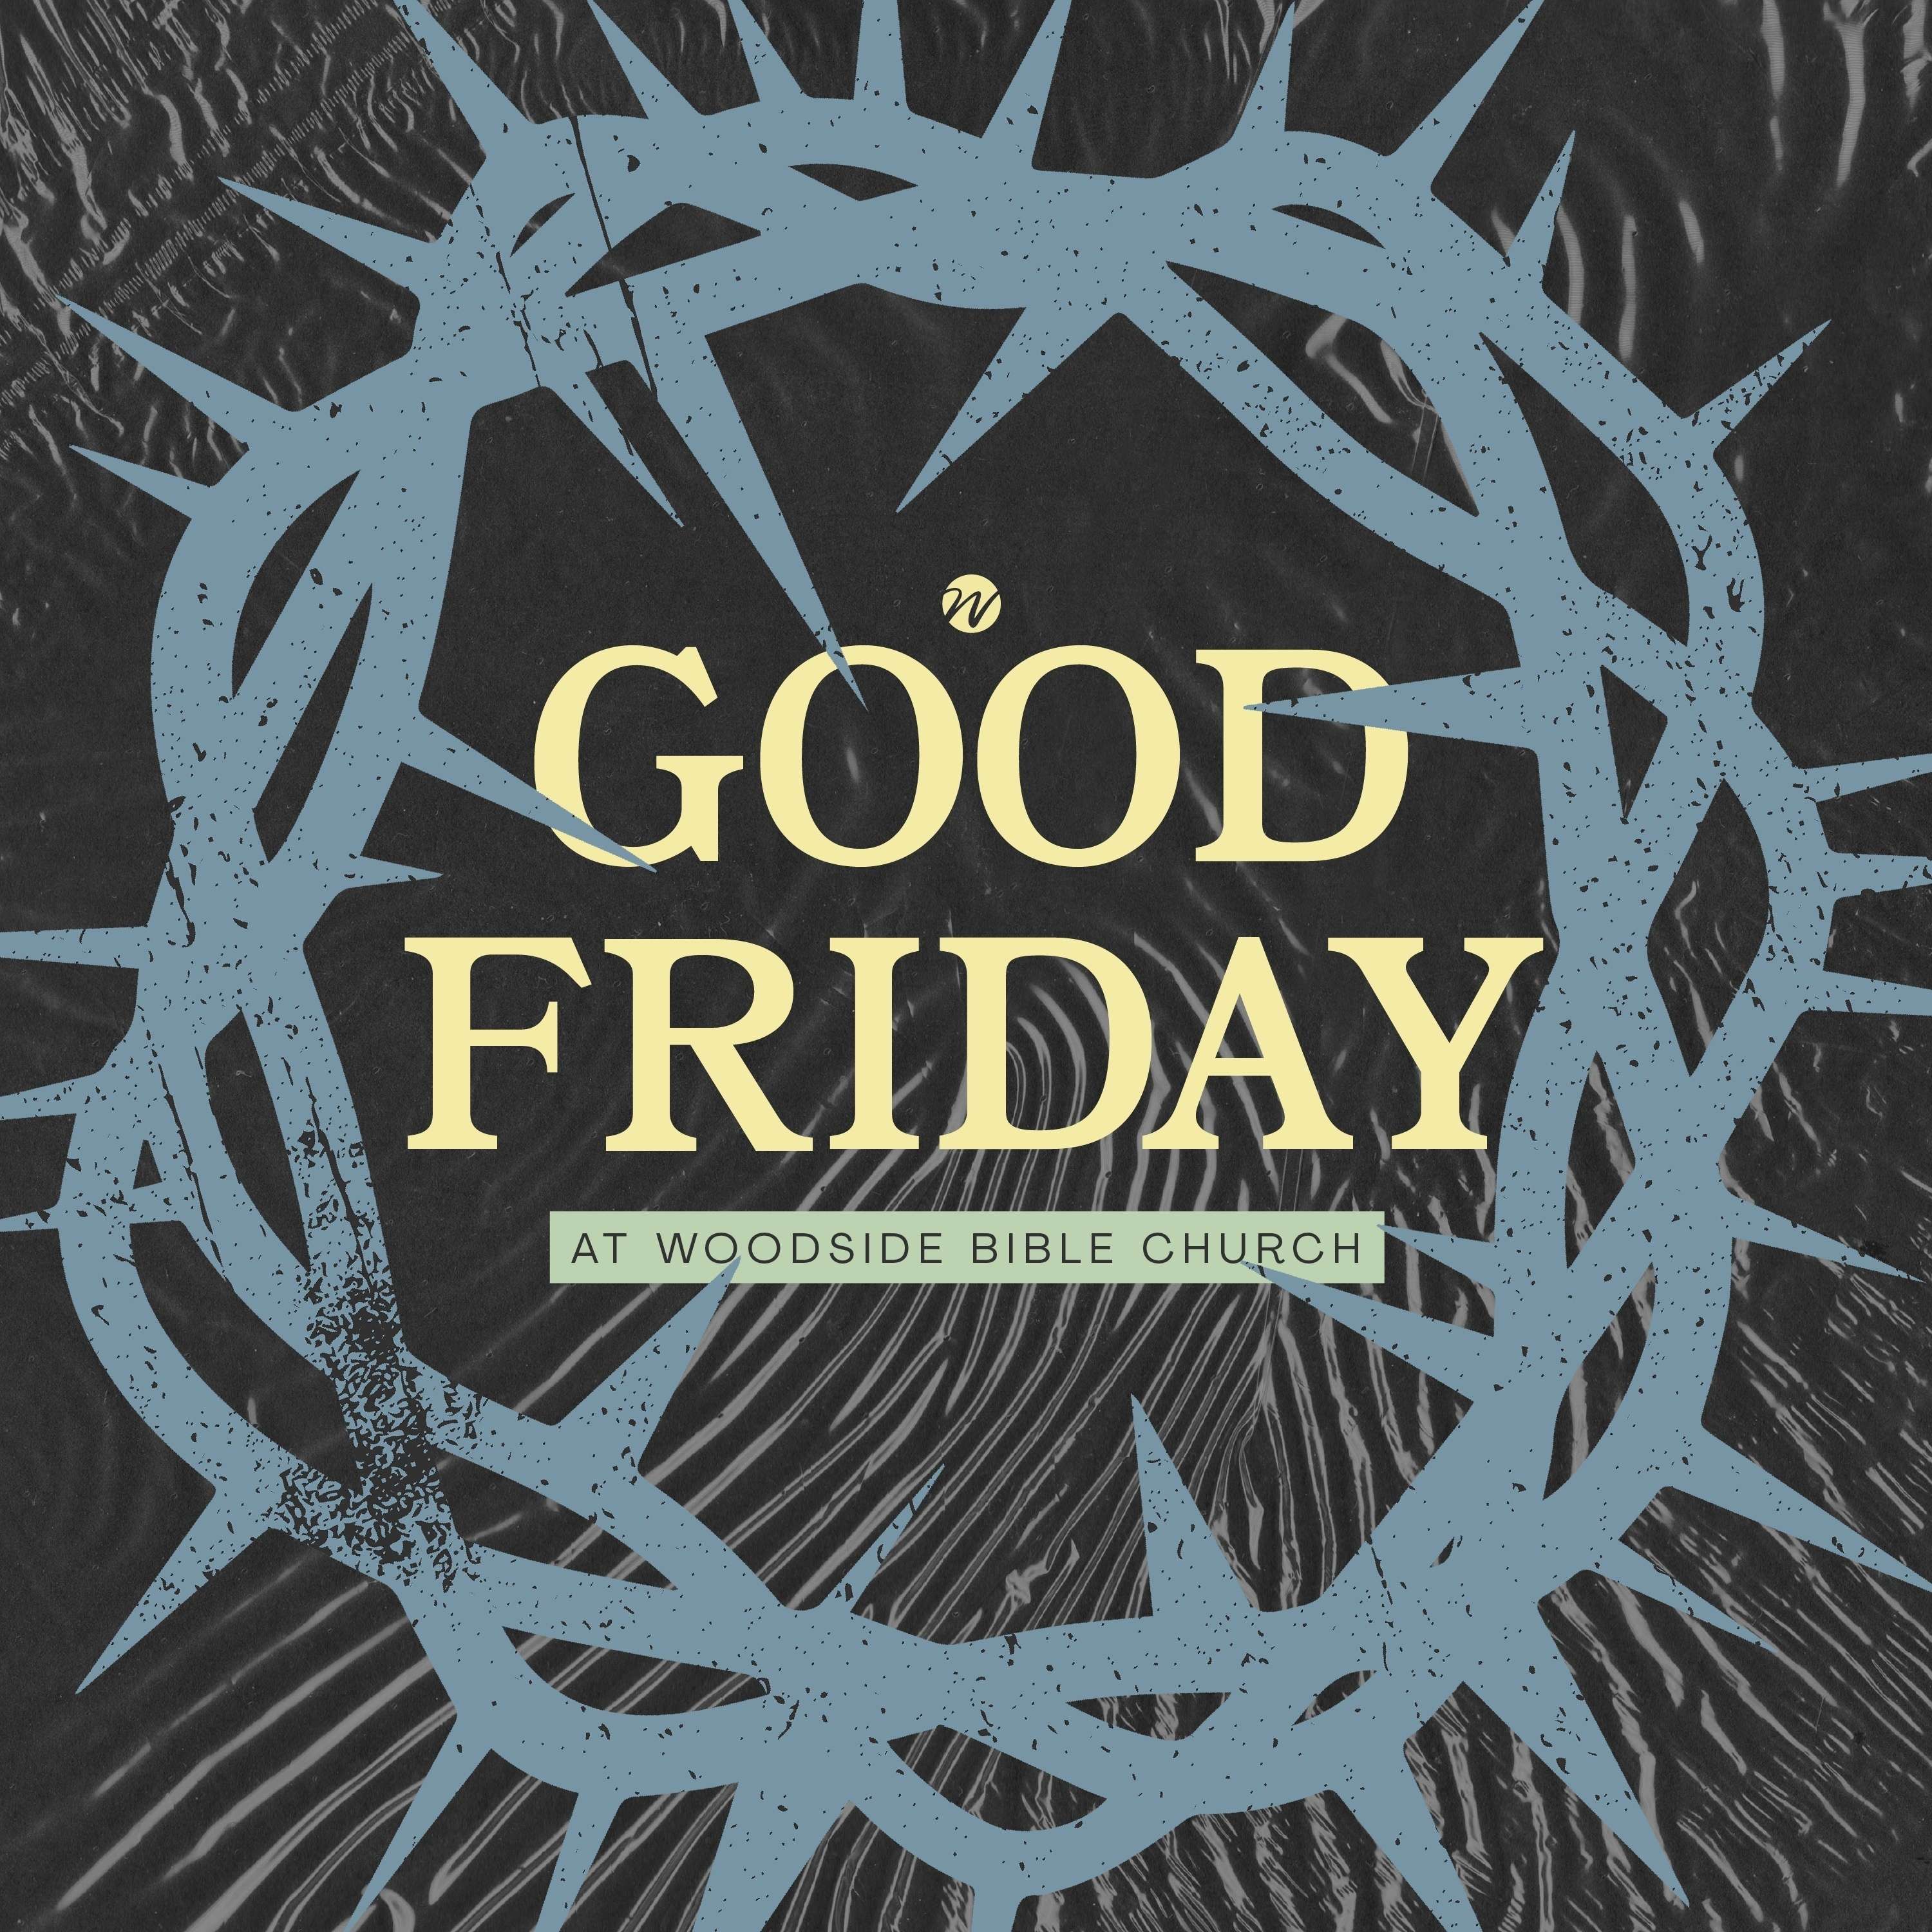 Belief that is Personal - Good Friday - Woodside Bible Church